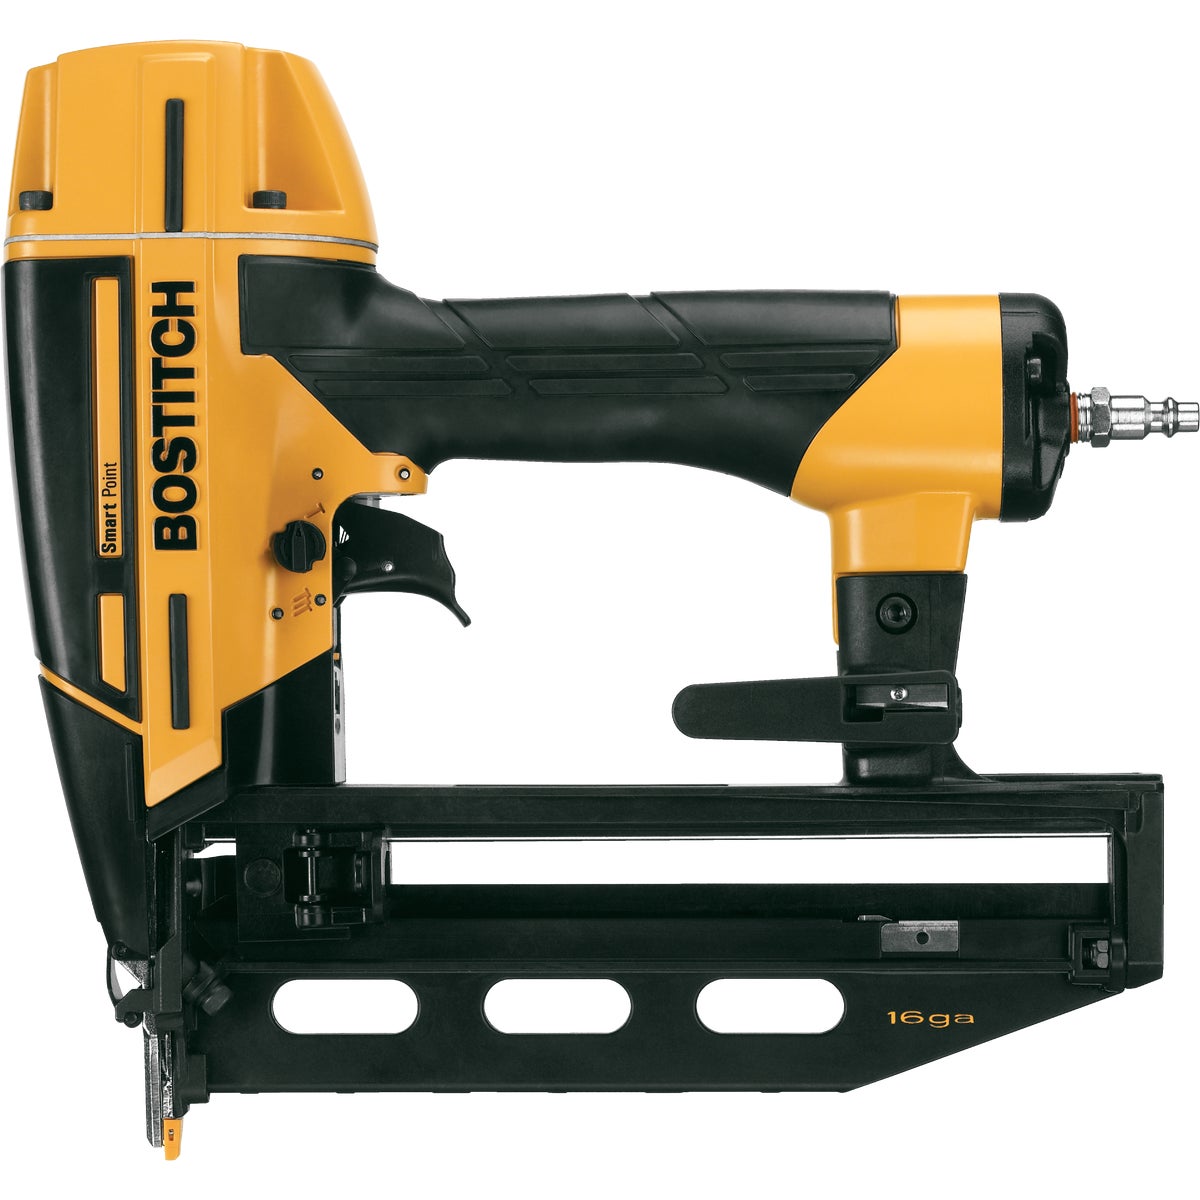 Bostitch Smart Point 16-Gauge 2-1/2 In. Straight Finish Nailer Kit